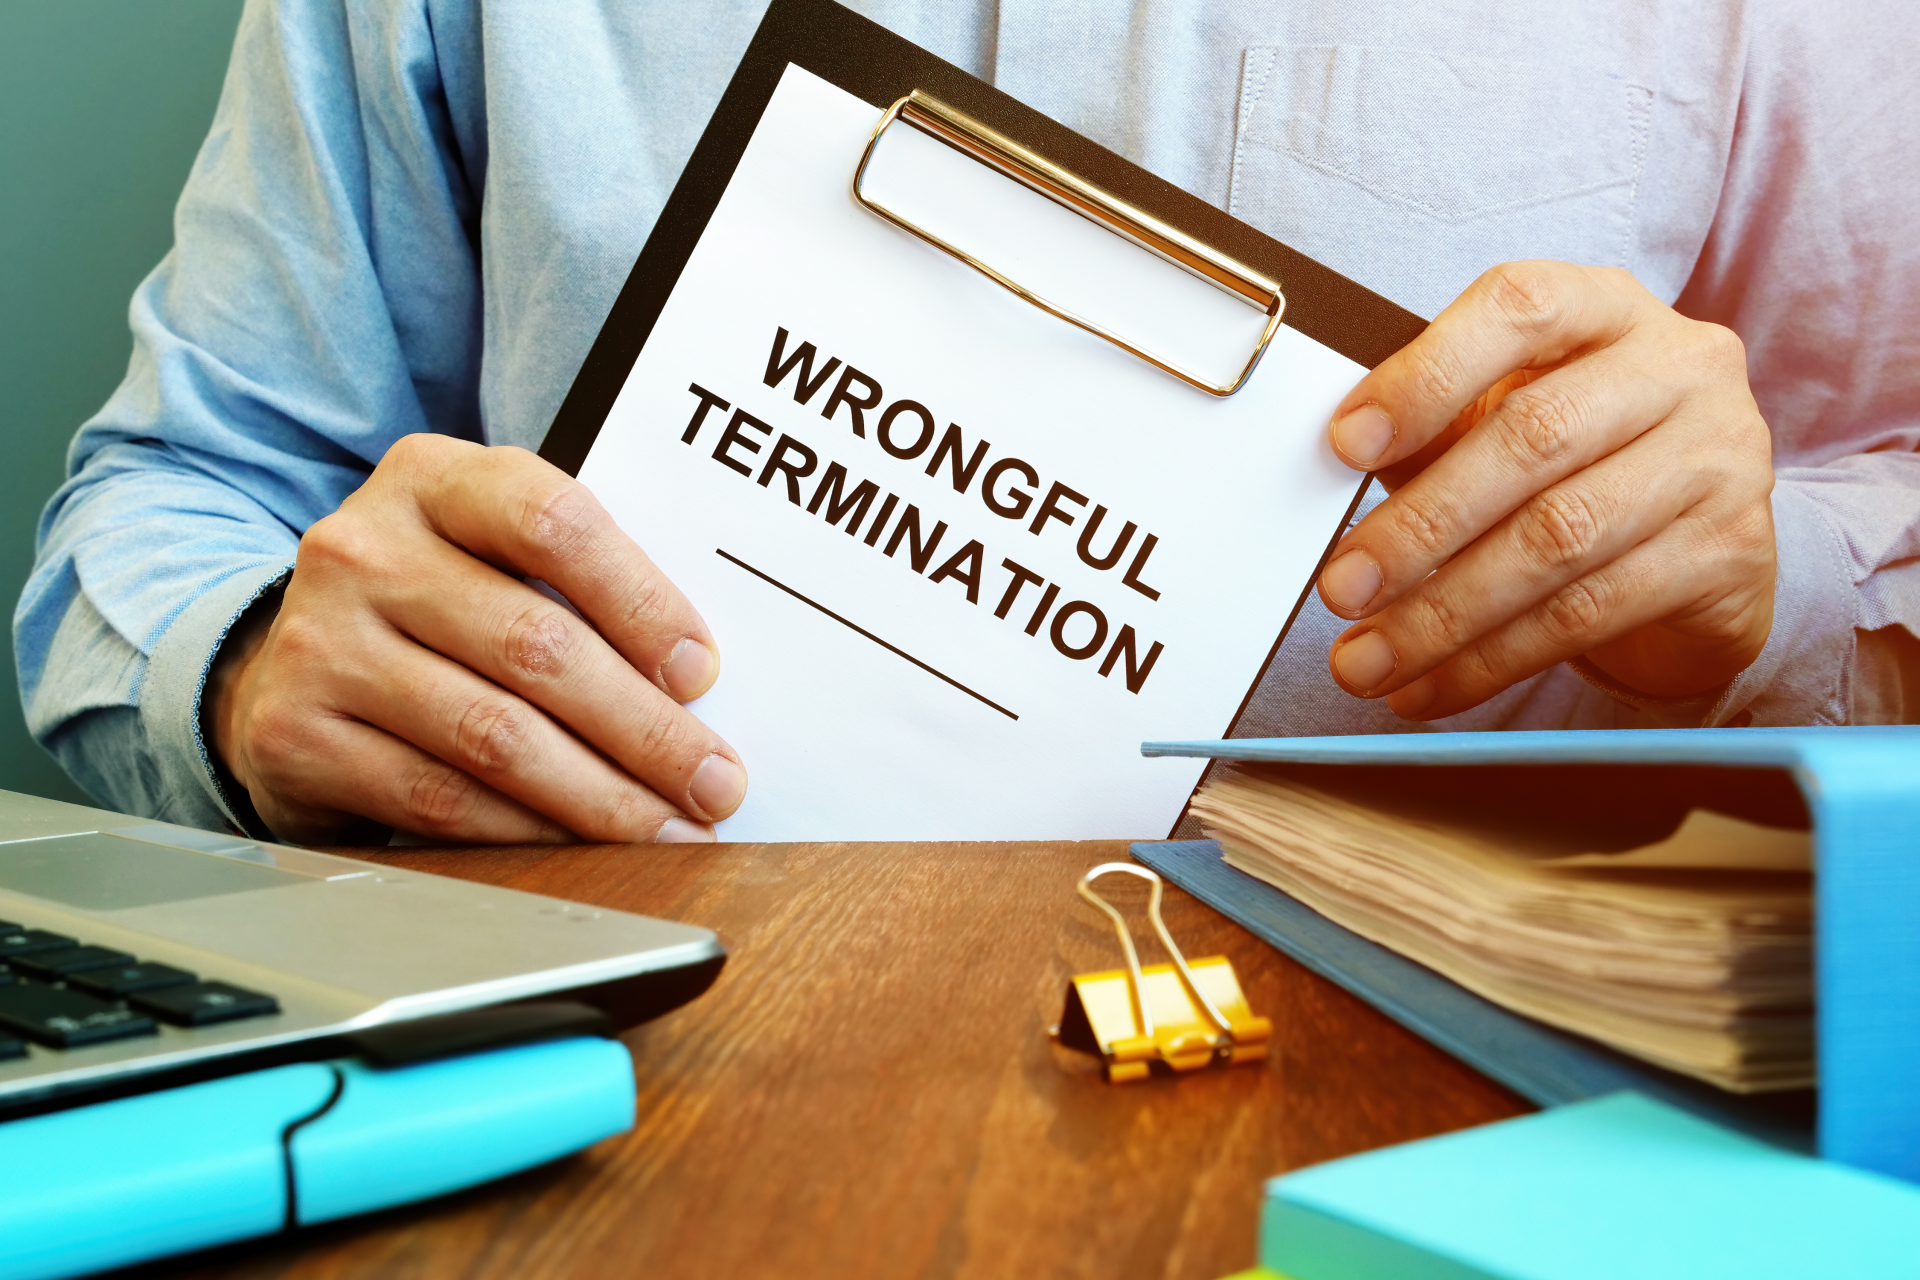 What Constitutes Wrongful Termination in Florida?